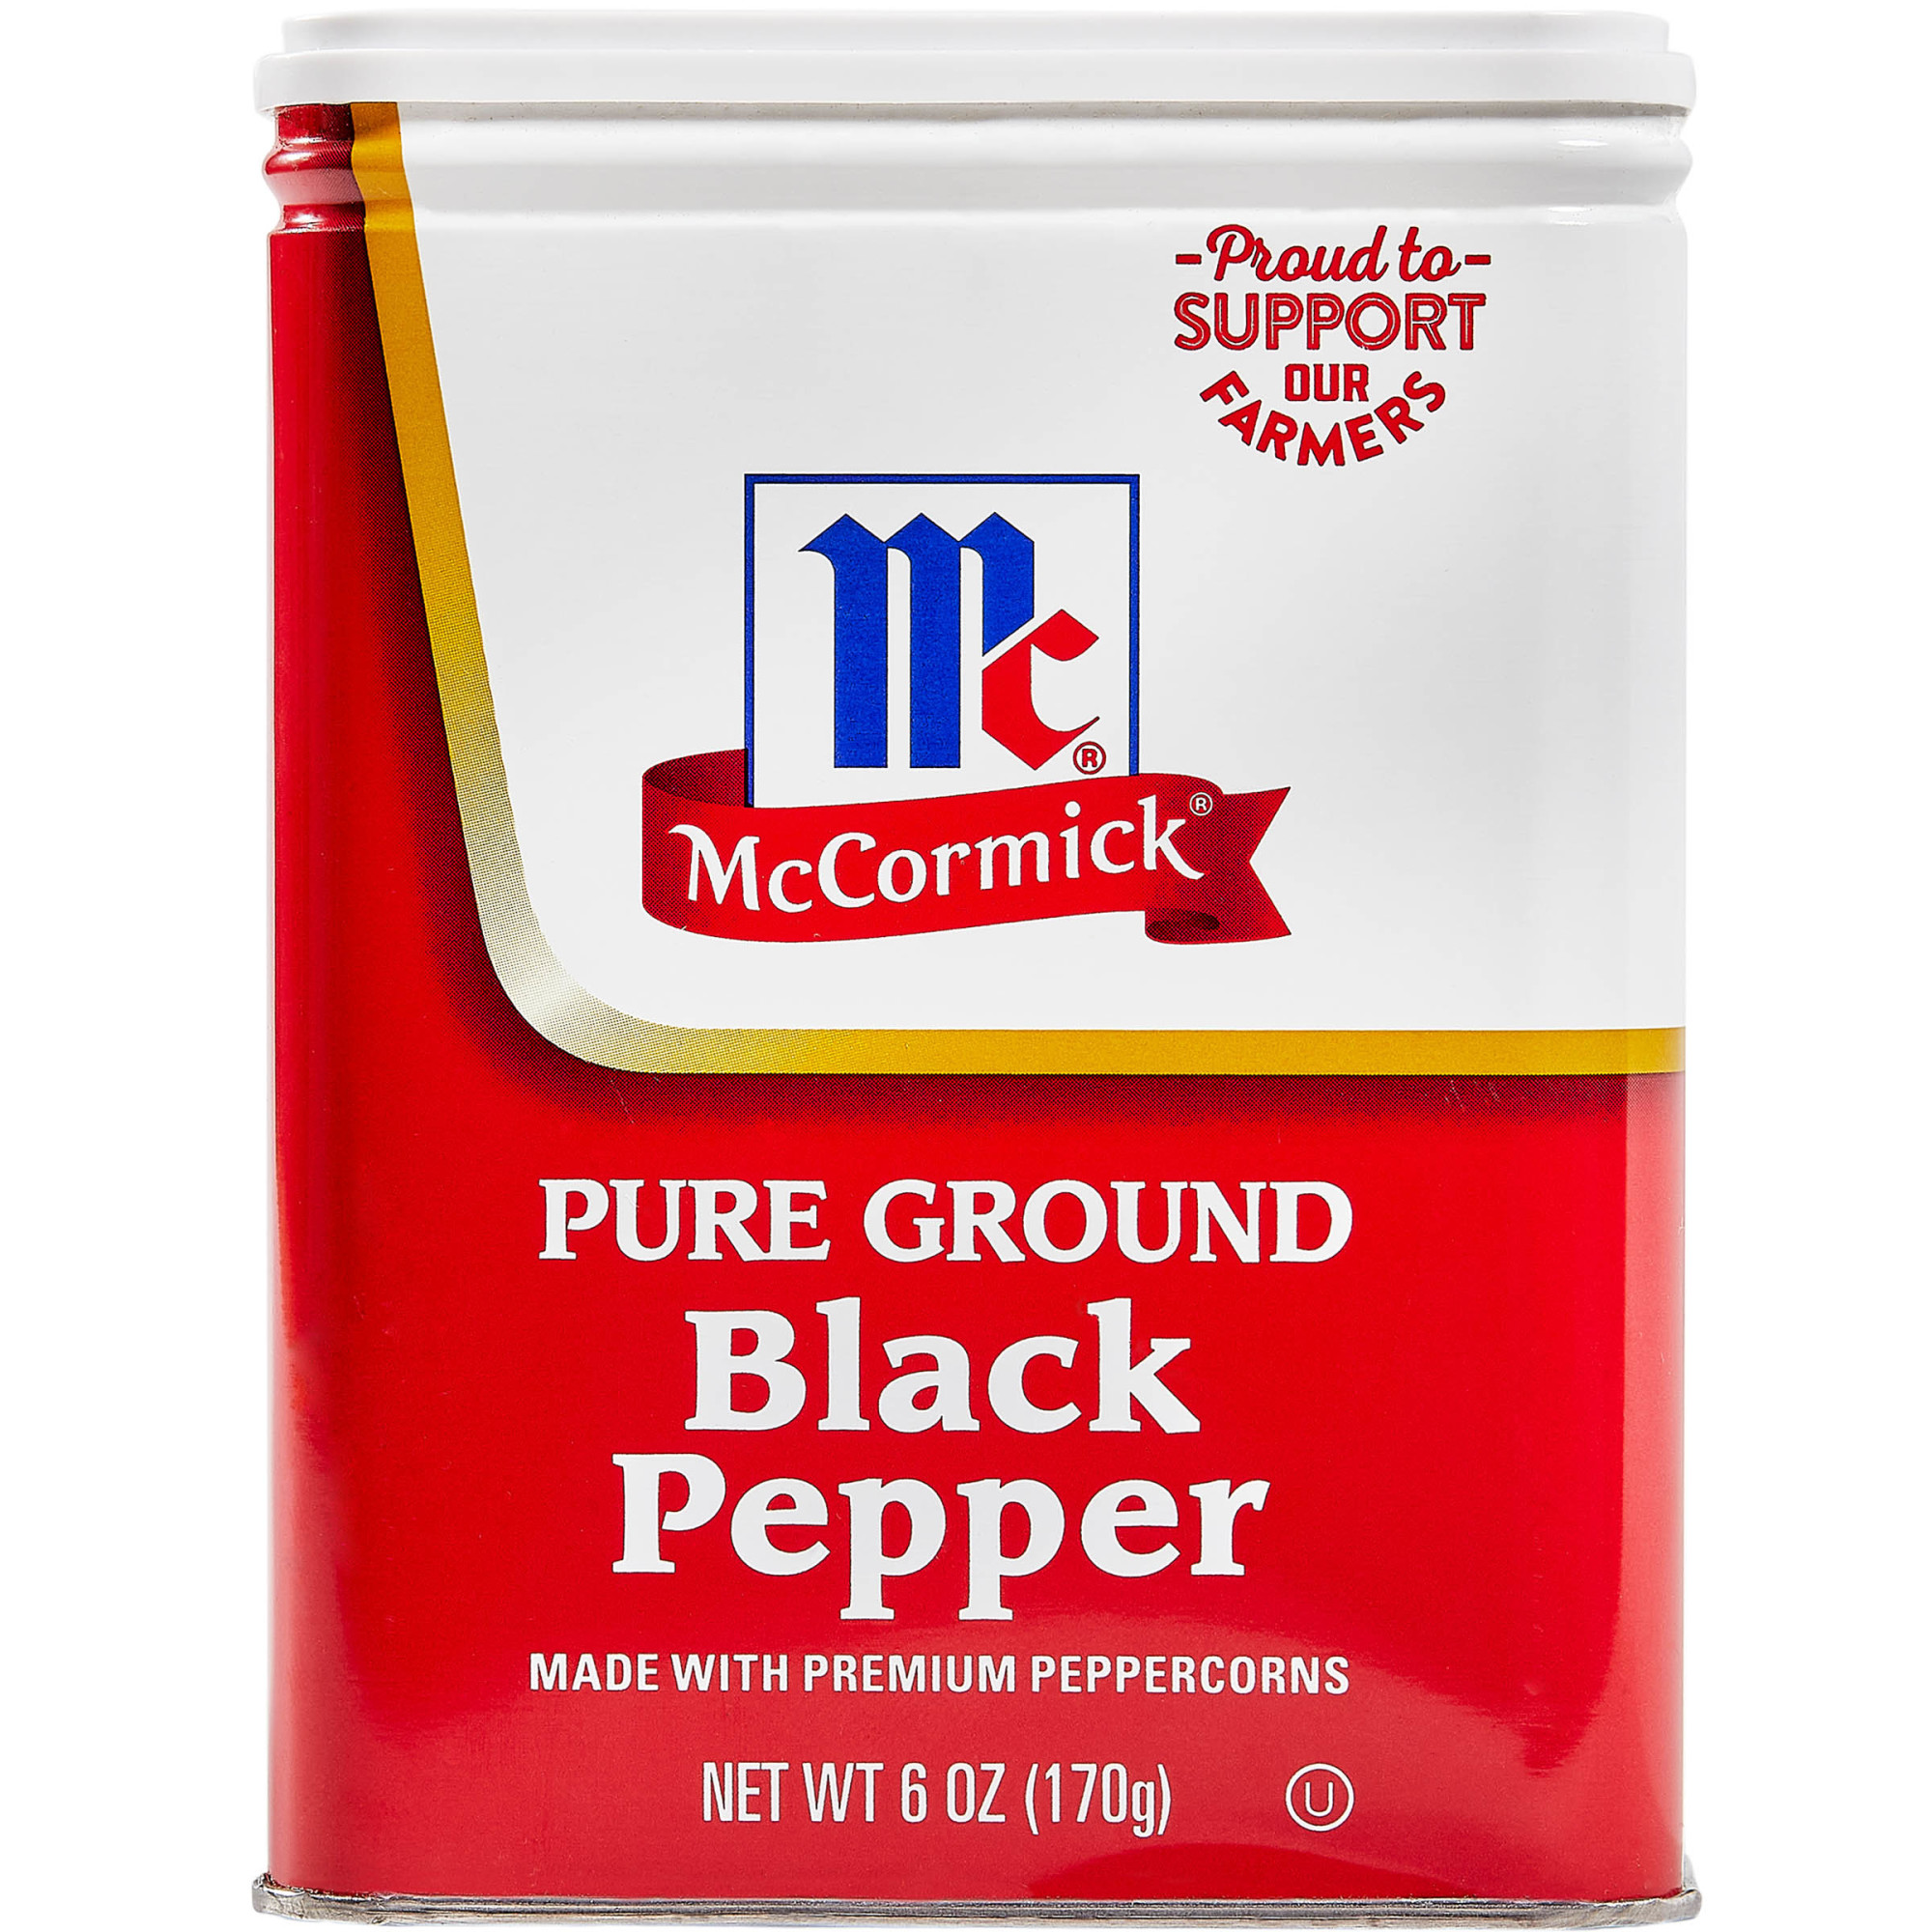 McCormick Pure Ground Black Pepper, 6 oz Can - image 1 of 11